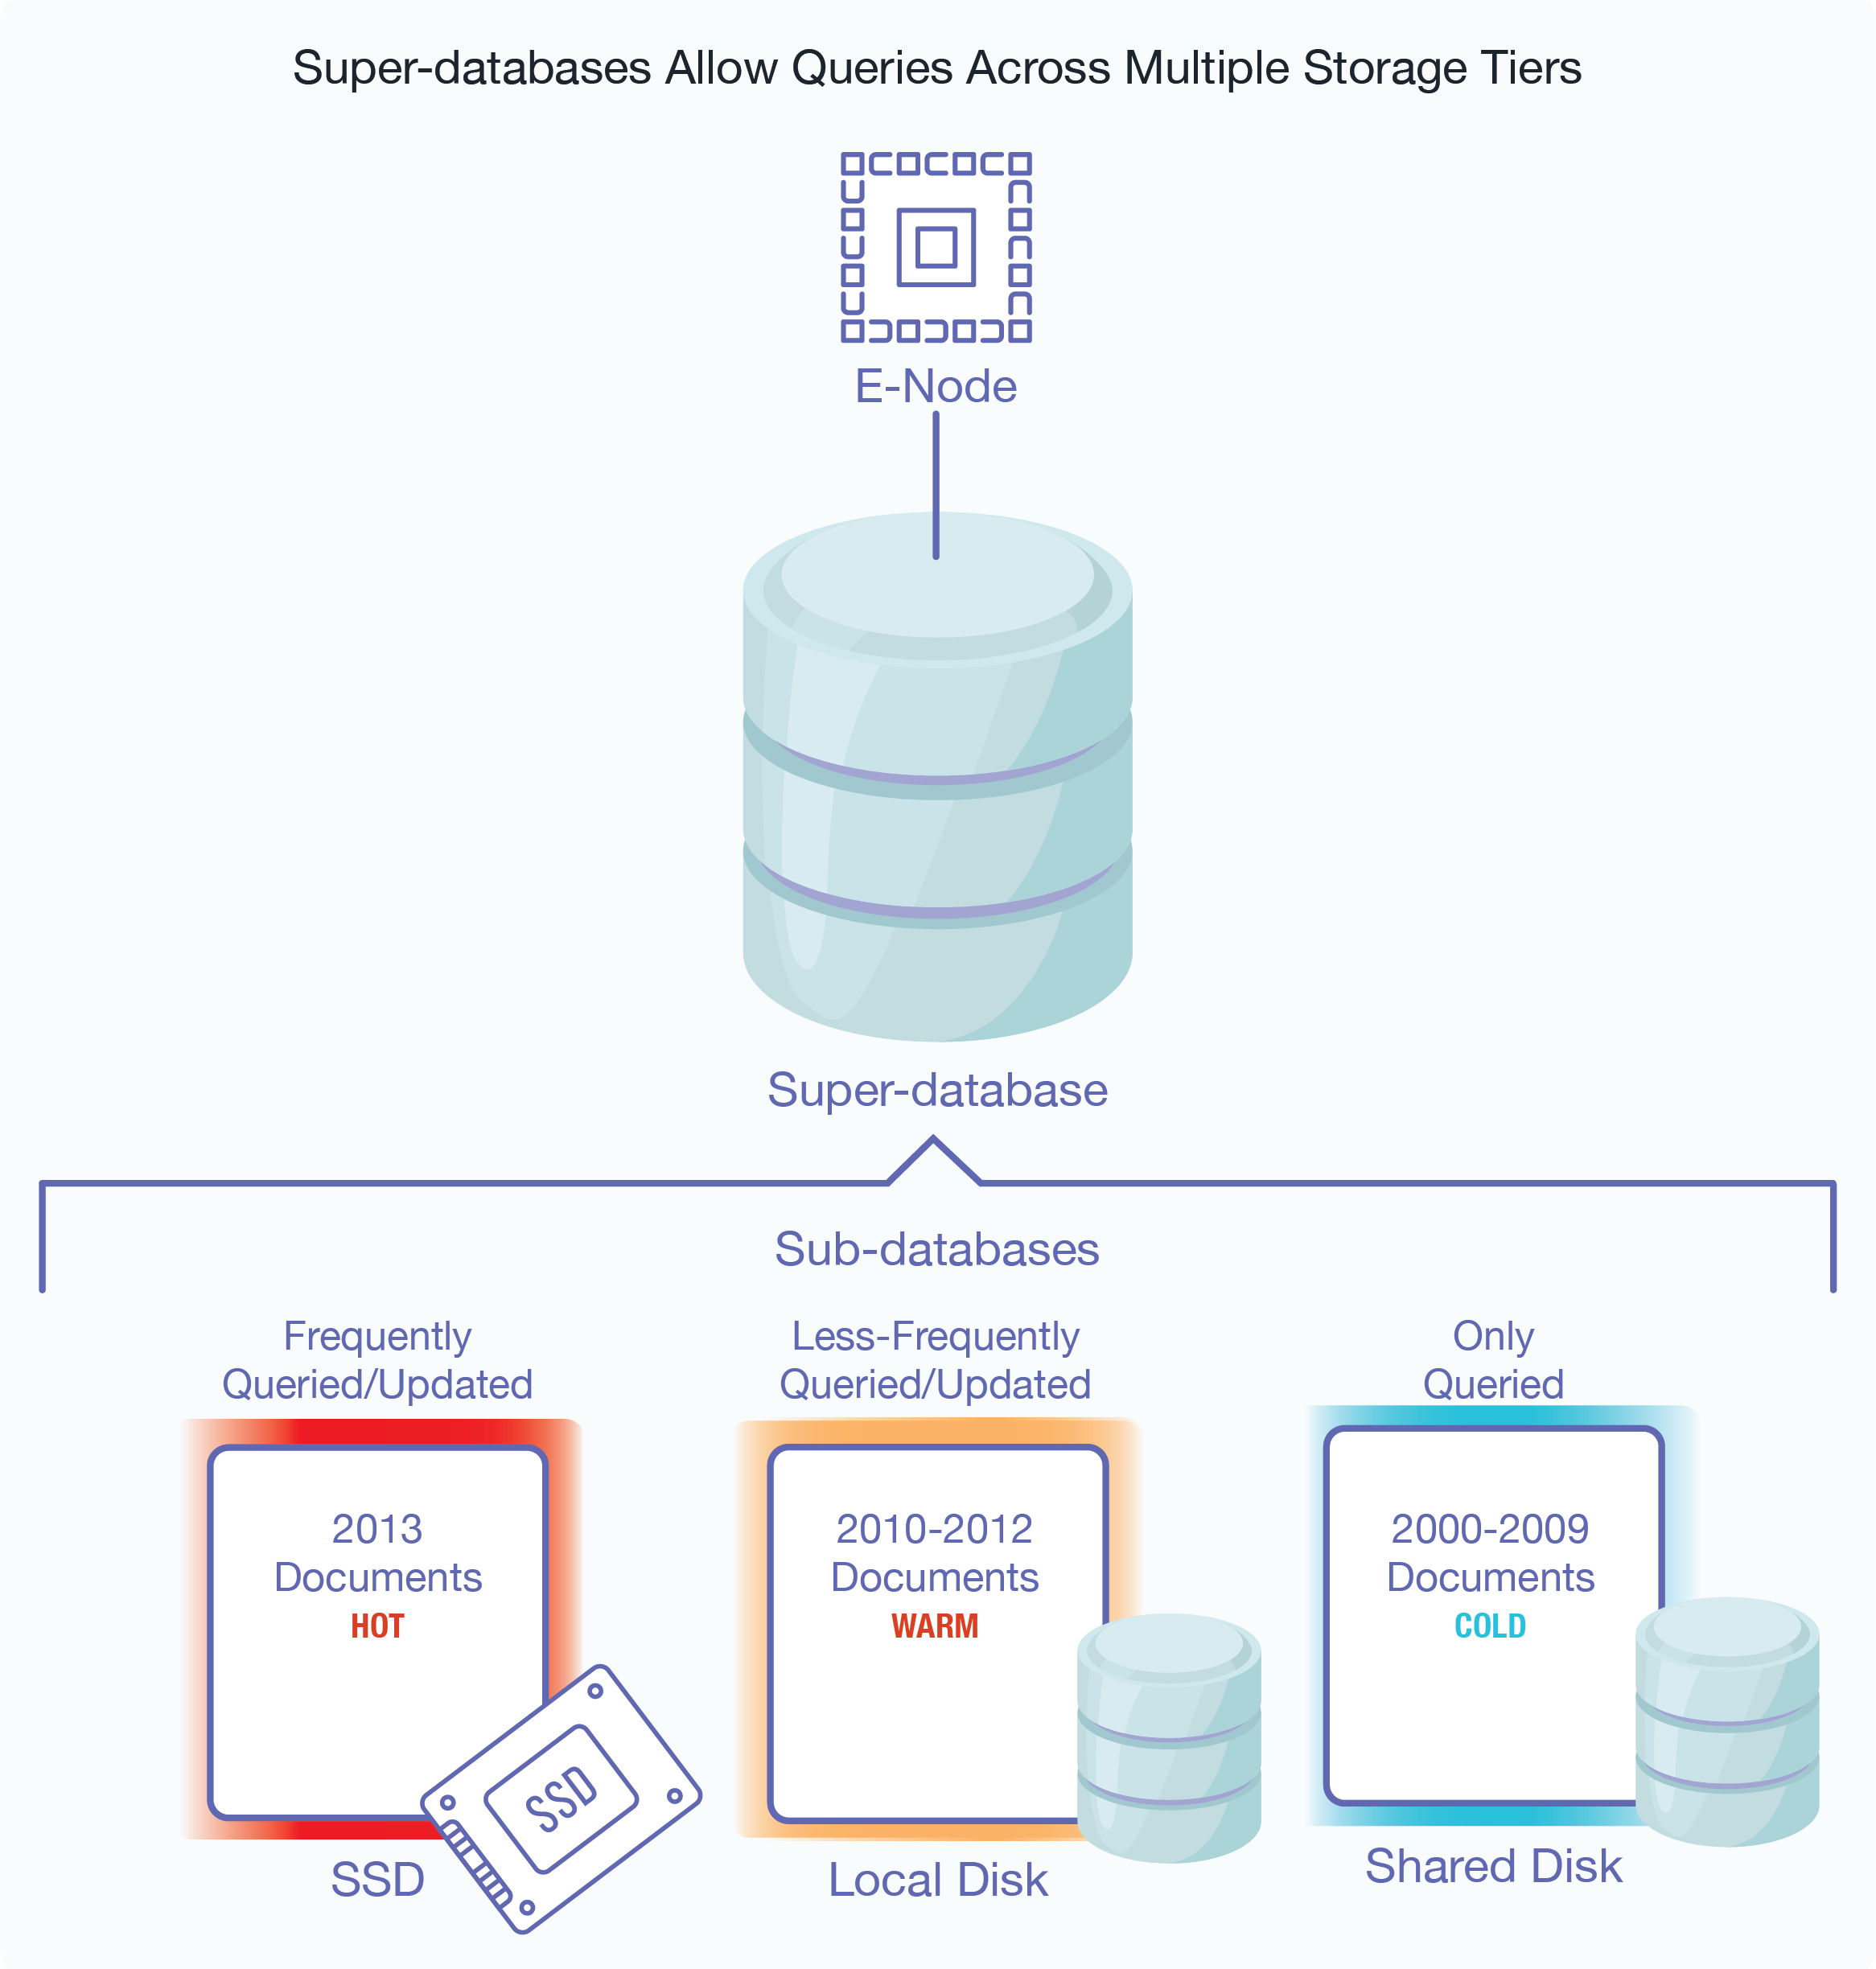 Graphic showing super-databases allowing queries across multiple storage tiers.